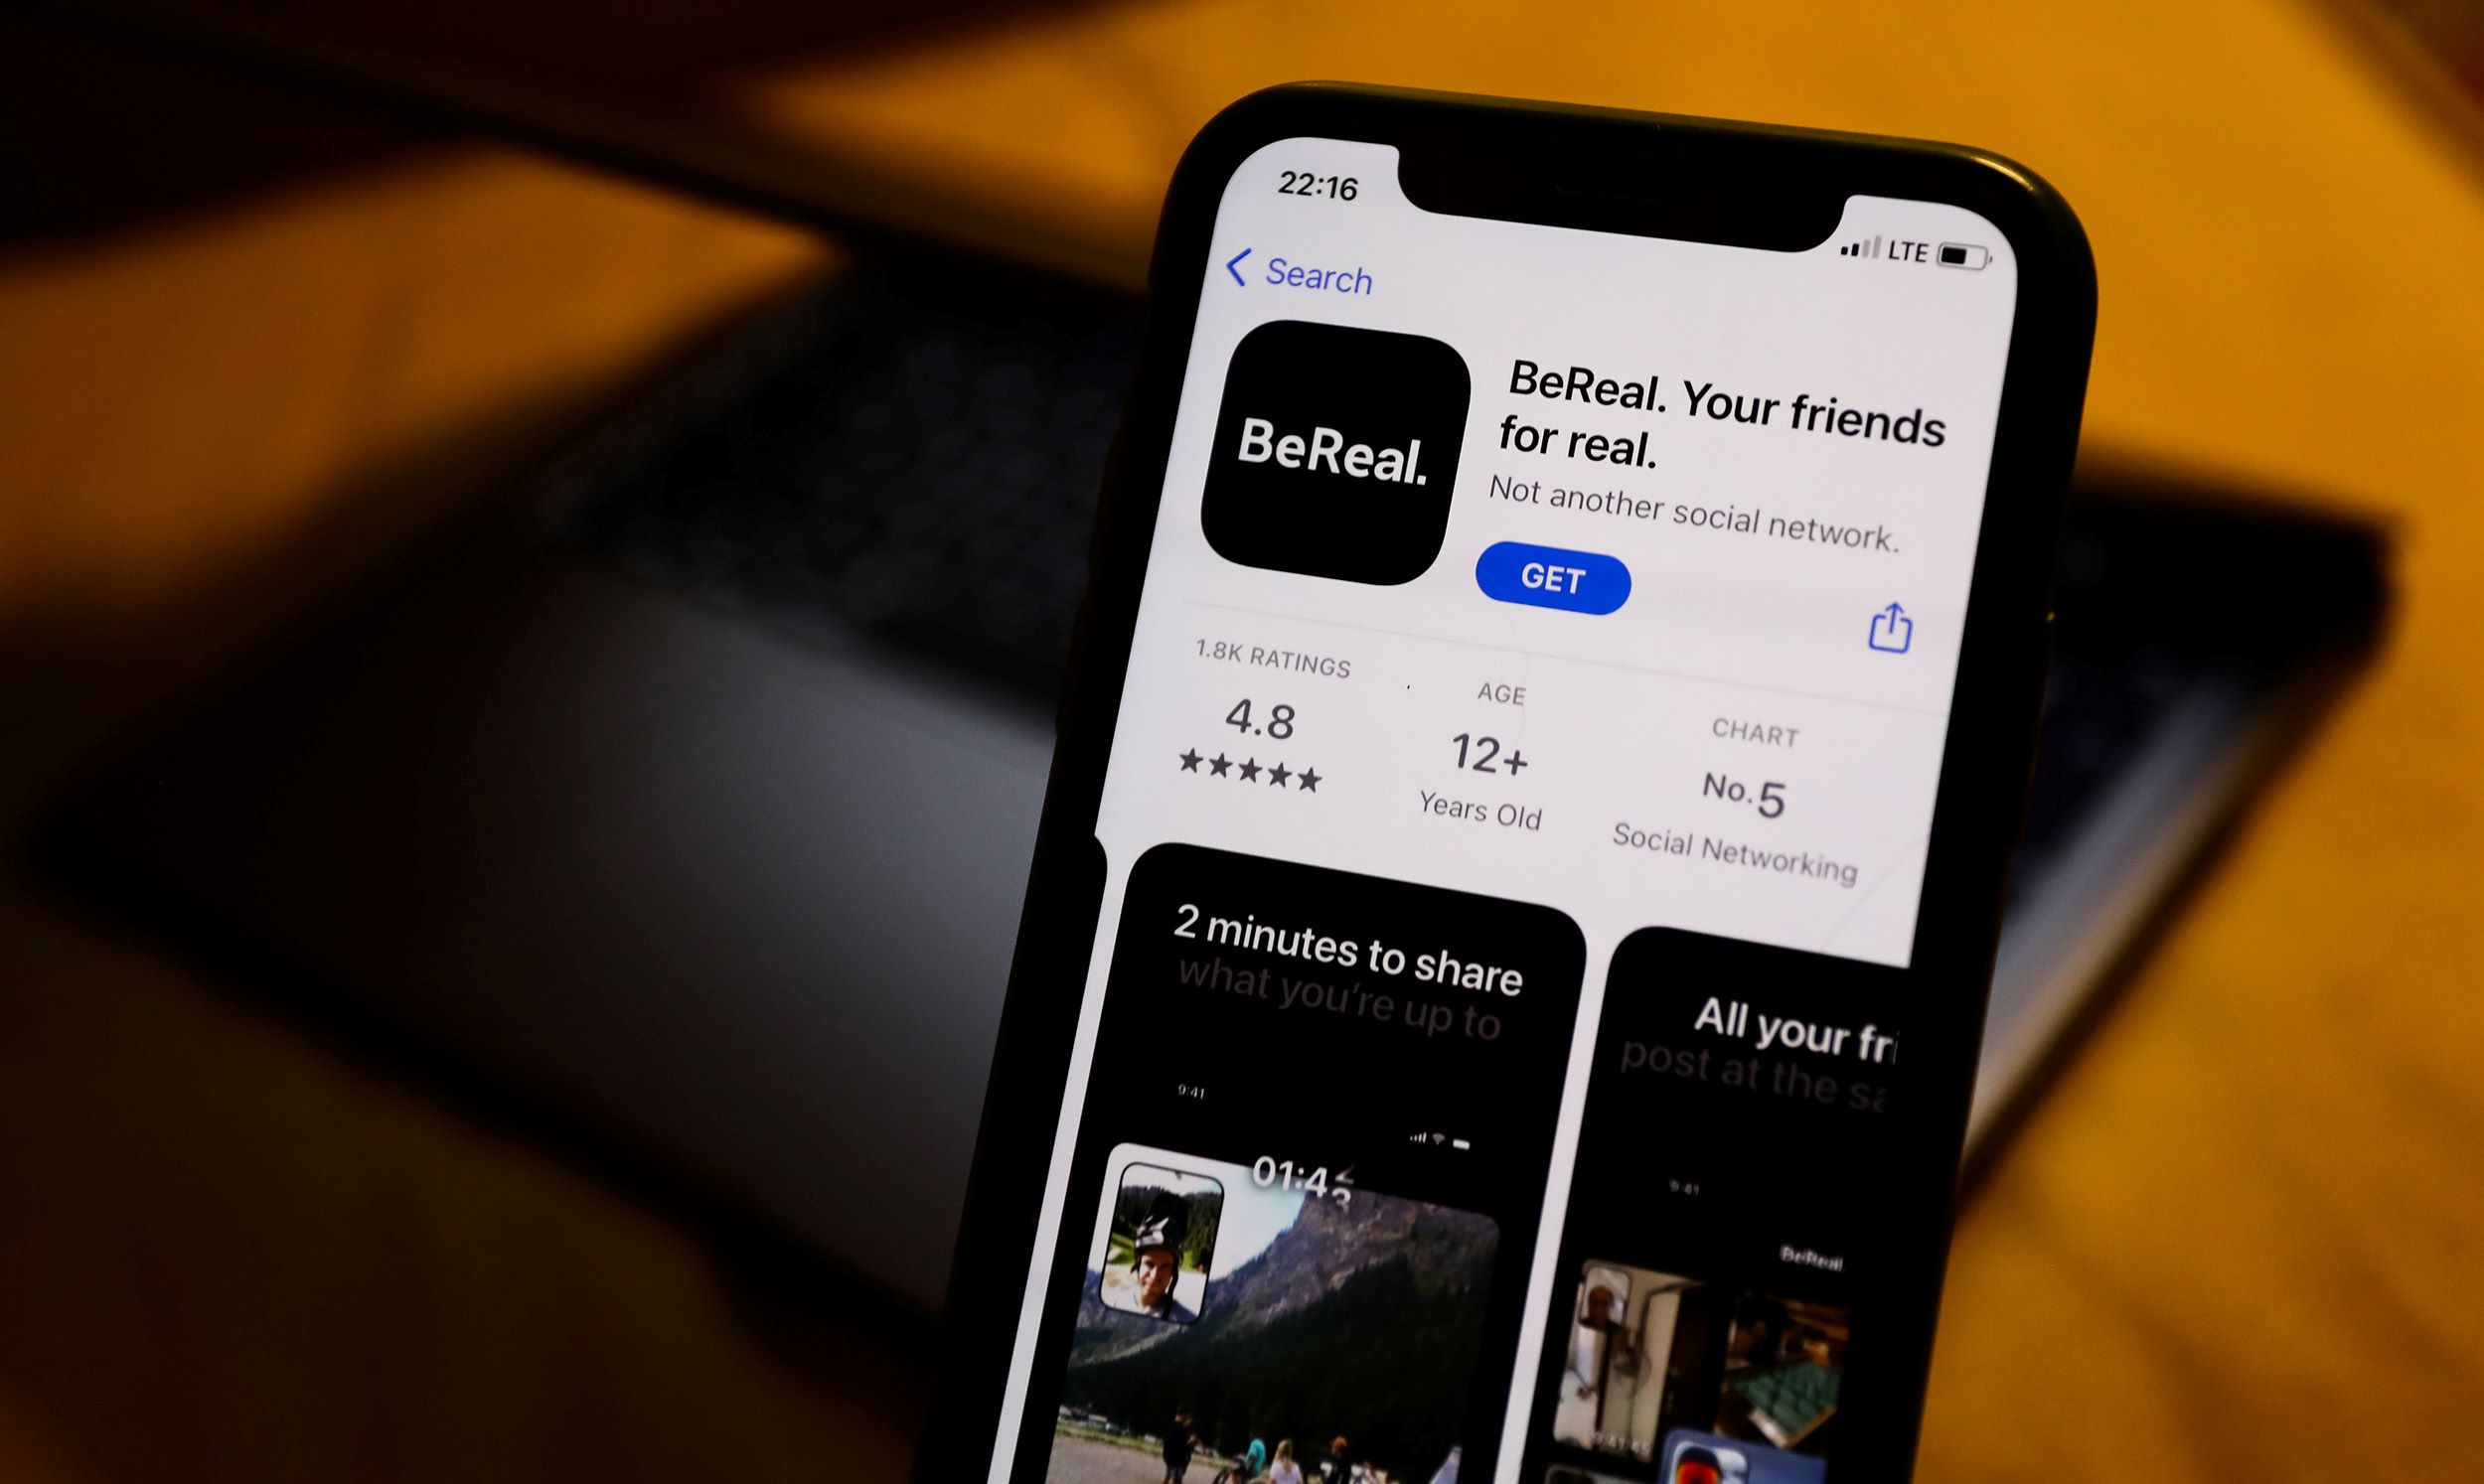 BeReal Pushes Back At Report, Claims 25 Million Daily Users